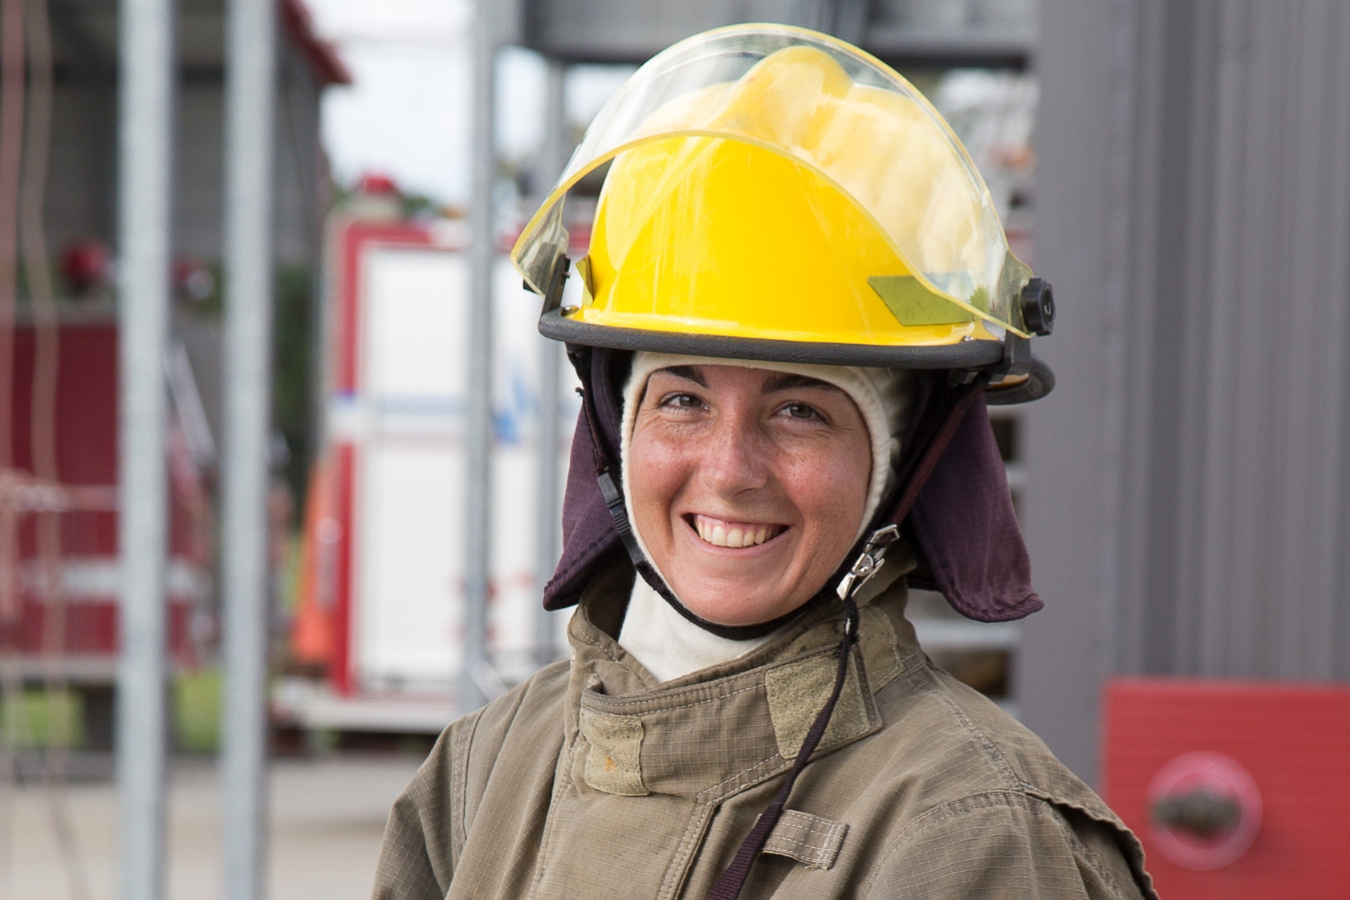 Female Fire Science student posing for a photo.